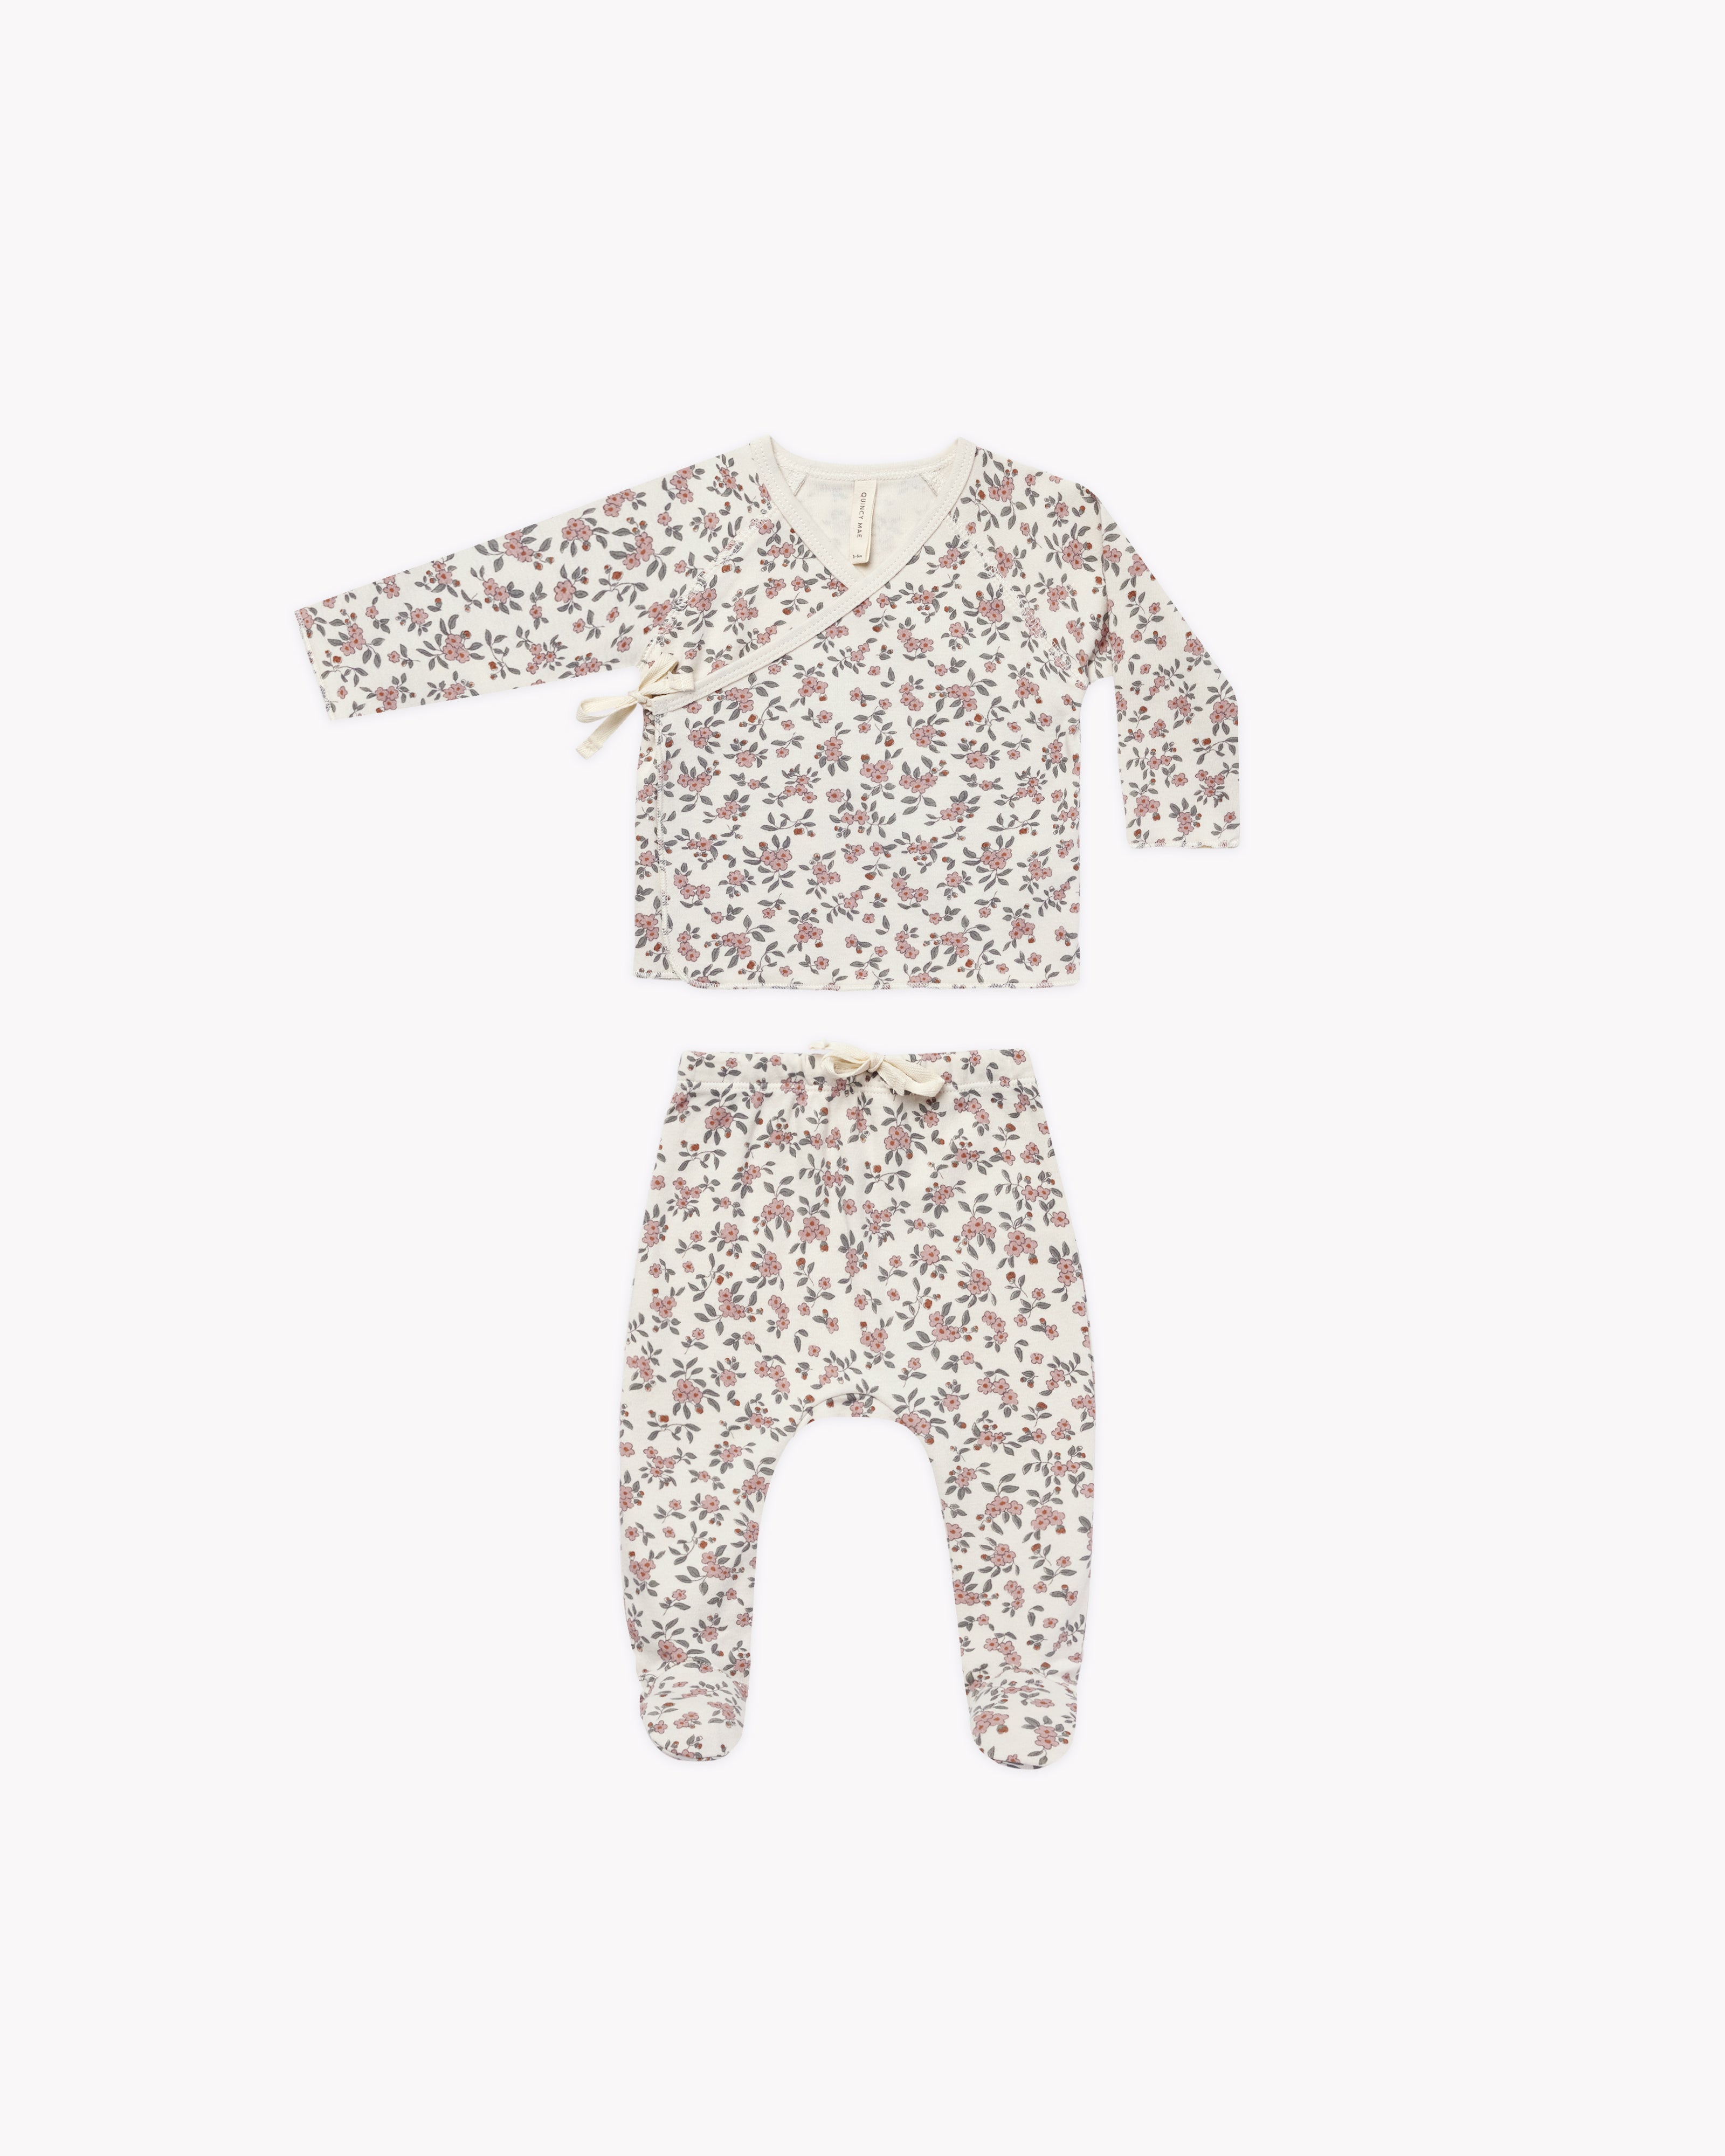 Wrap Top + Footed Pant Set || Meadow - Rylee + Cru | Kids Clothes | Trendy Baby Clothes | Modern Infant Outfits |